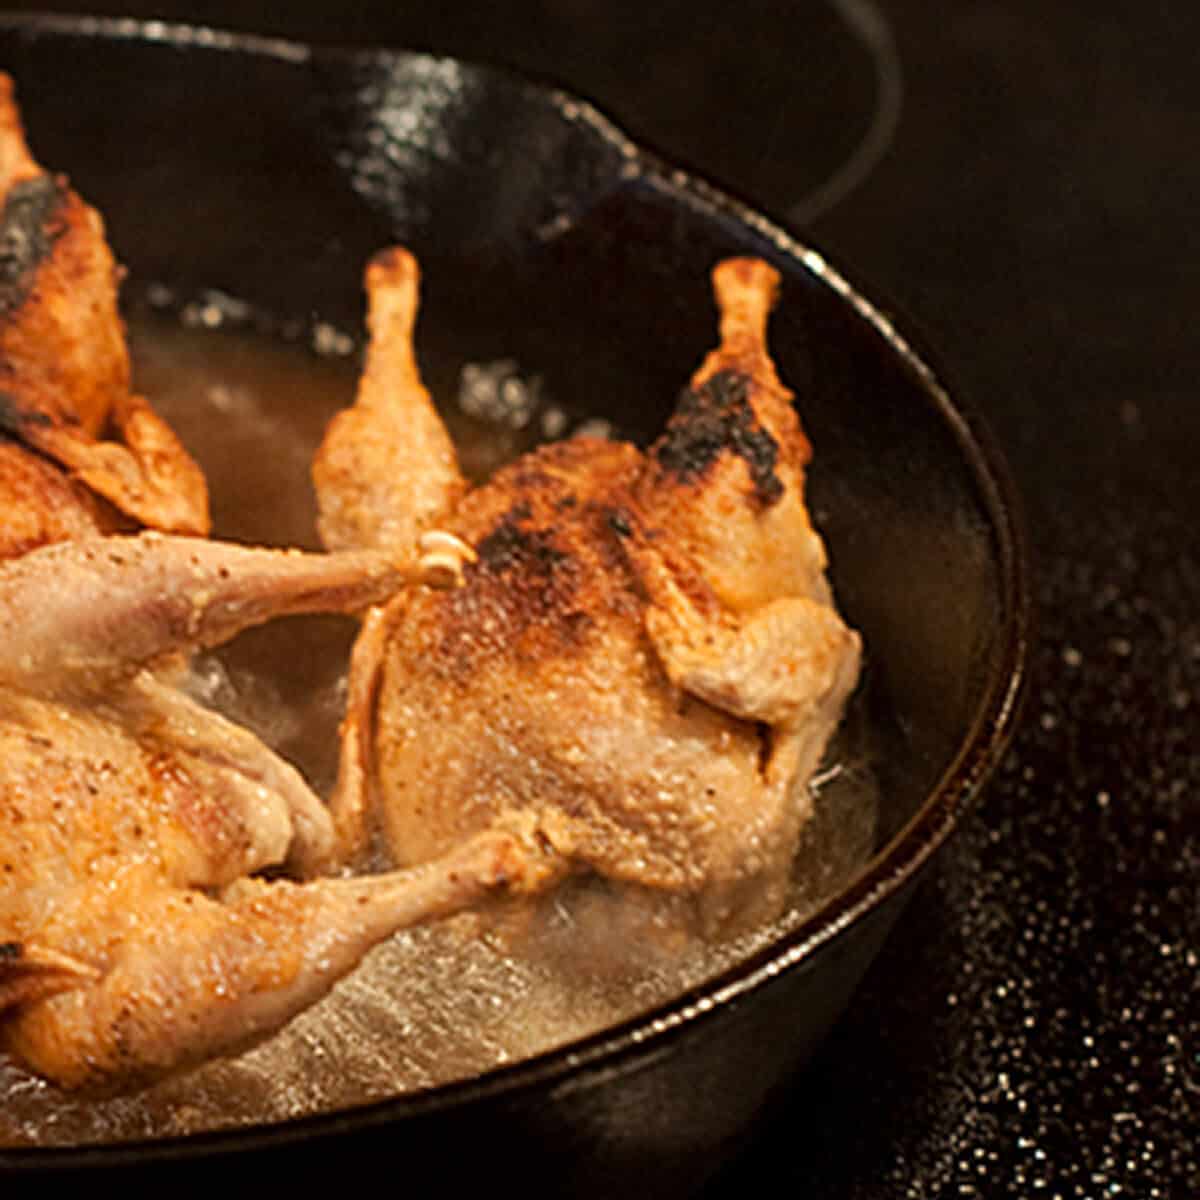 Quail frying in a cast iron pan.